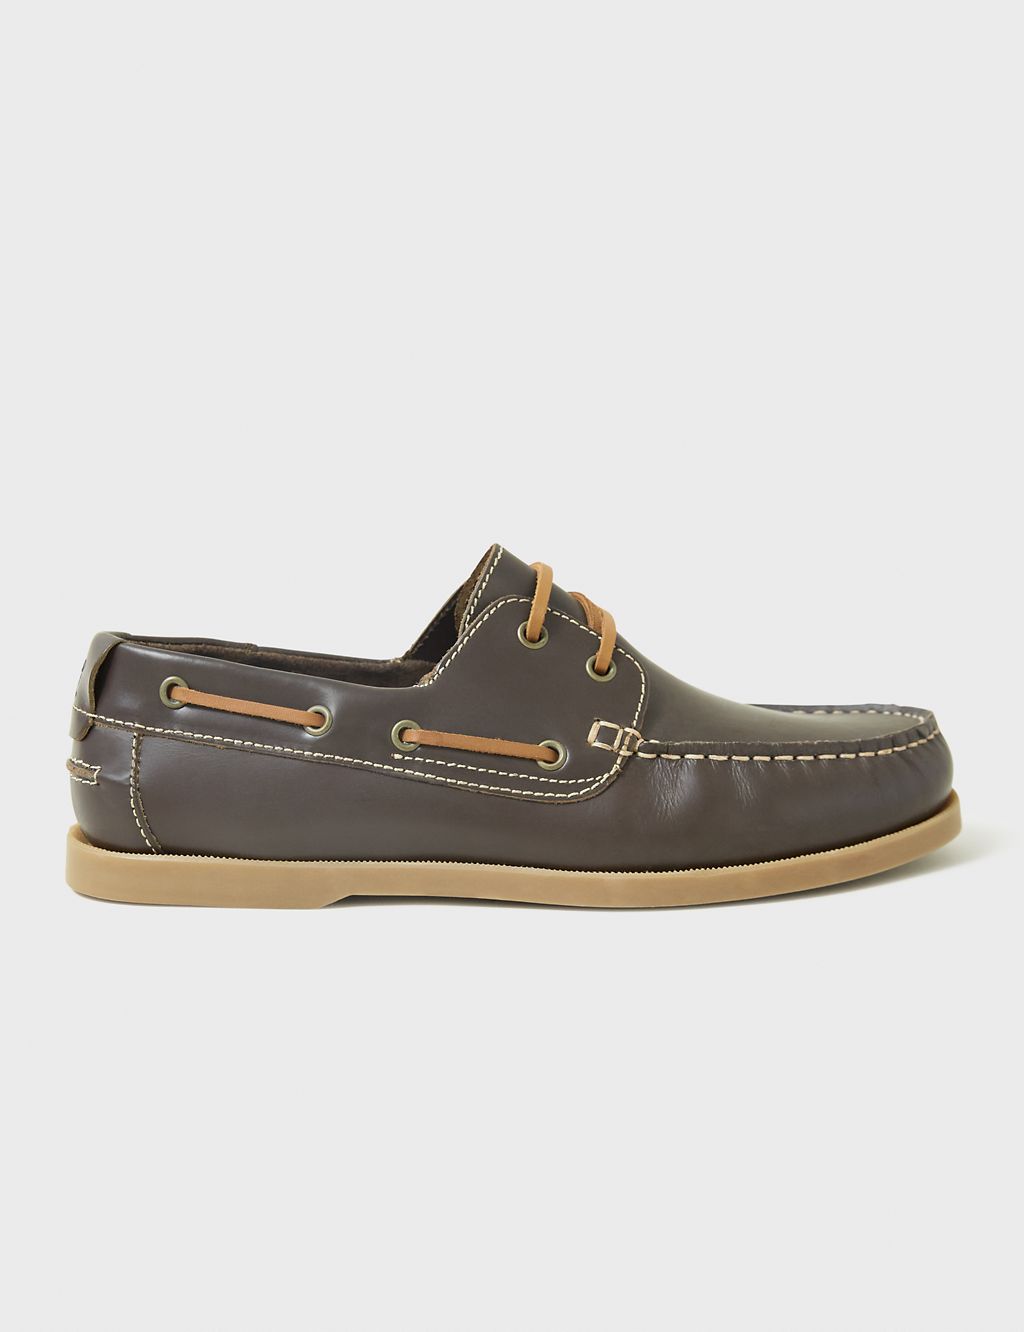 Leather Boat Shoes | Crew Clothing | M&S